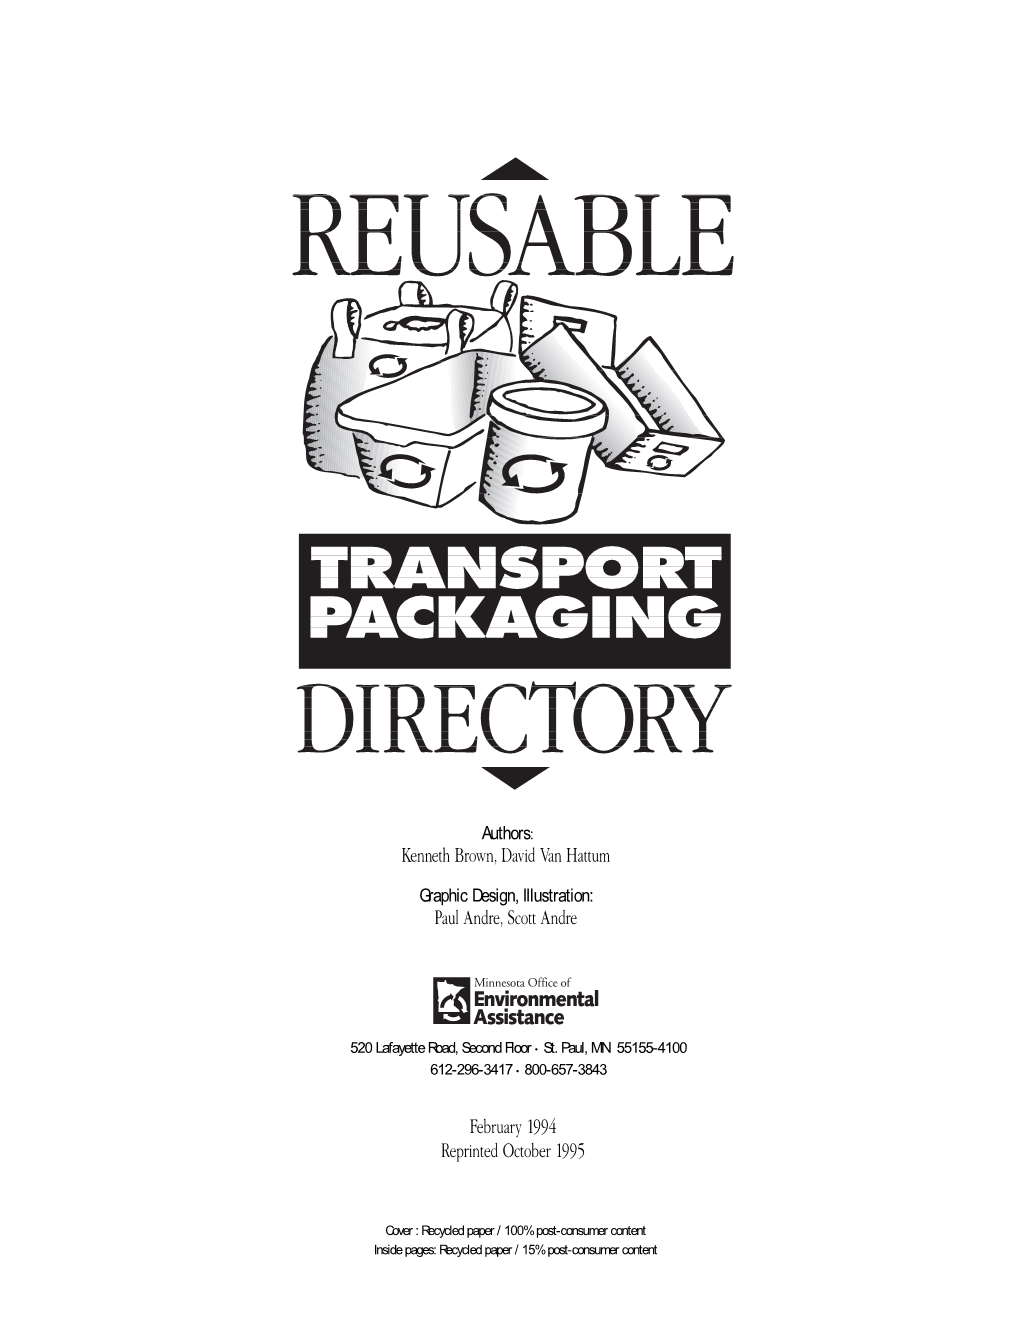 Reusable Transport Packaging Directory